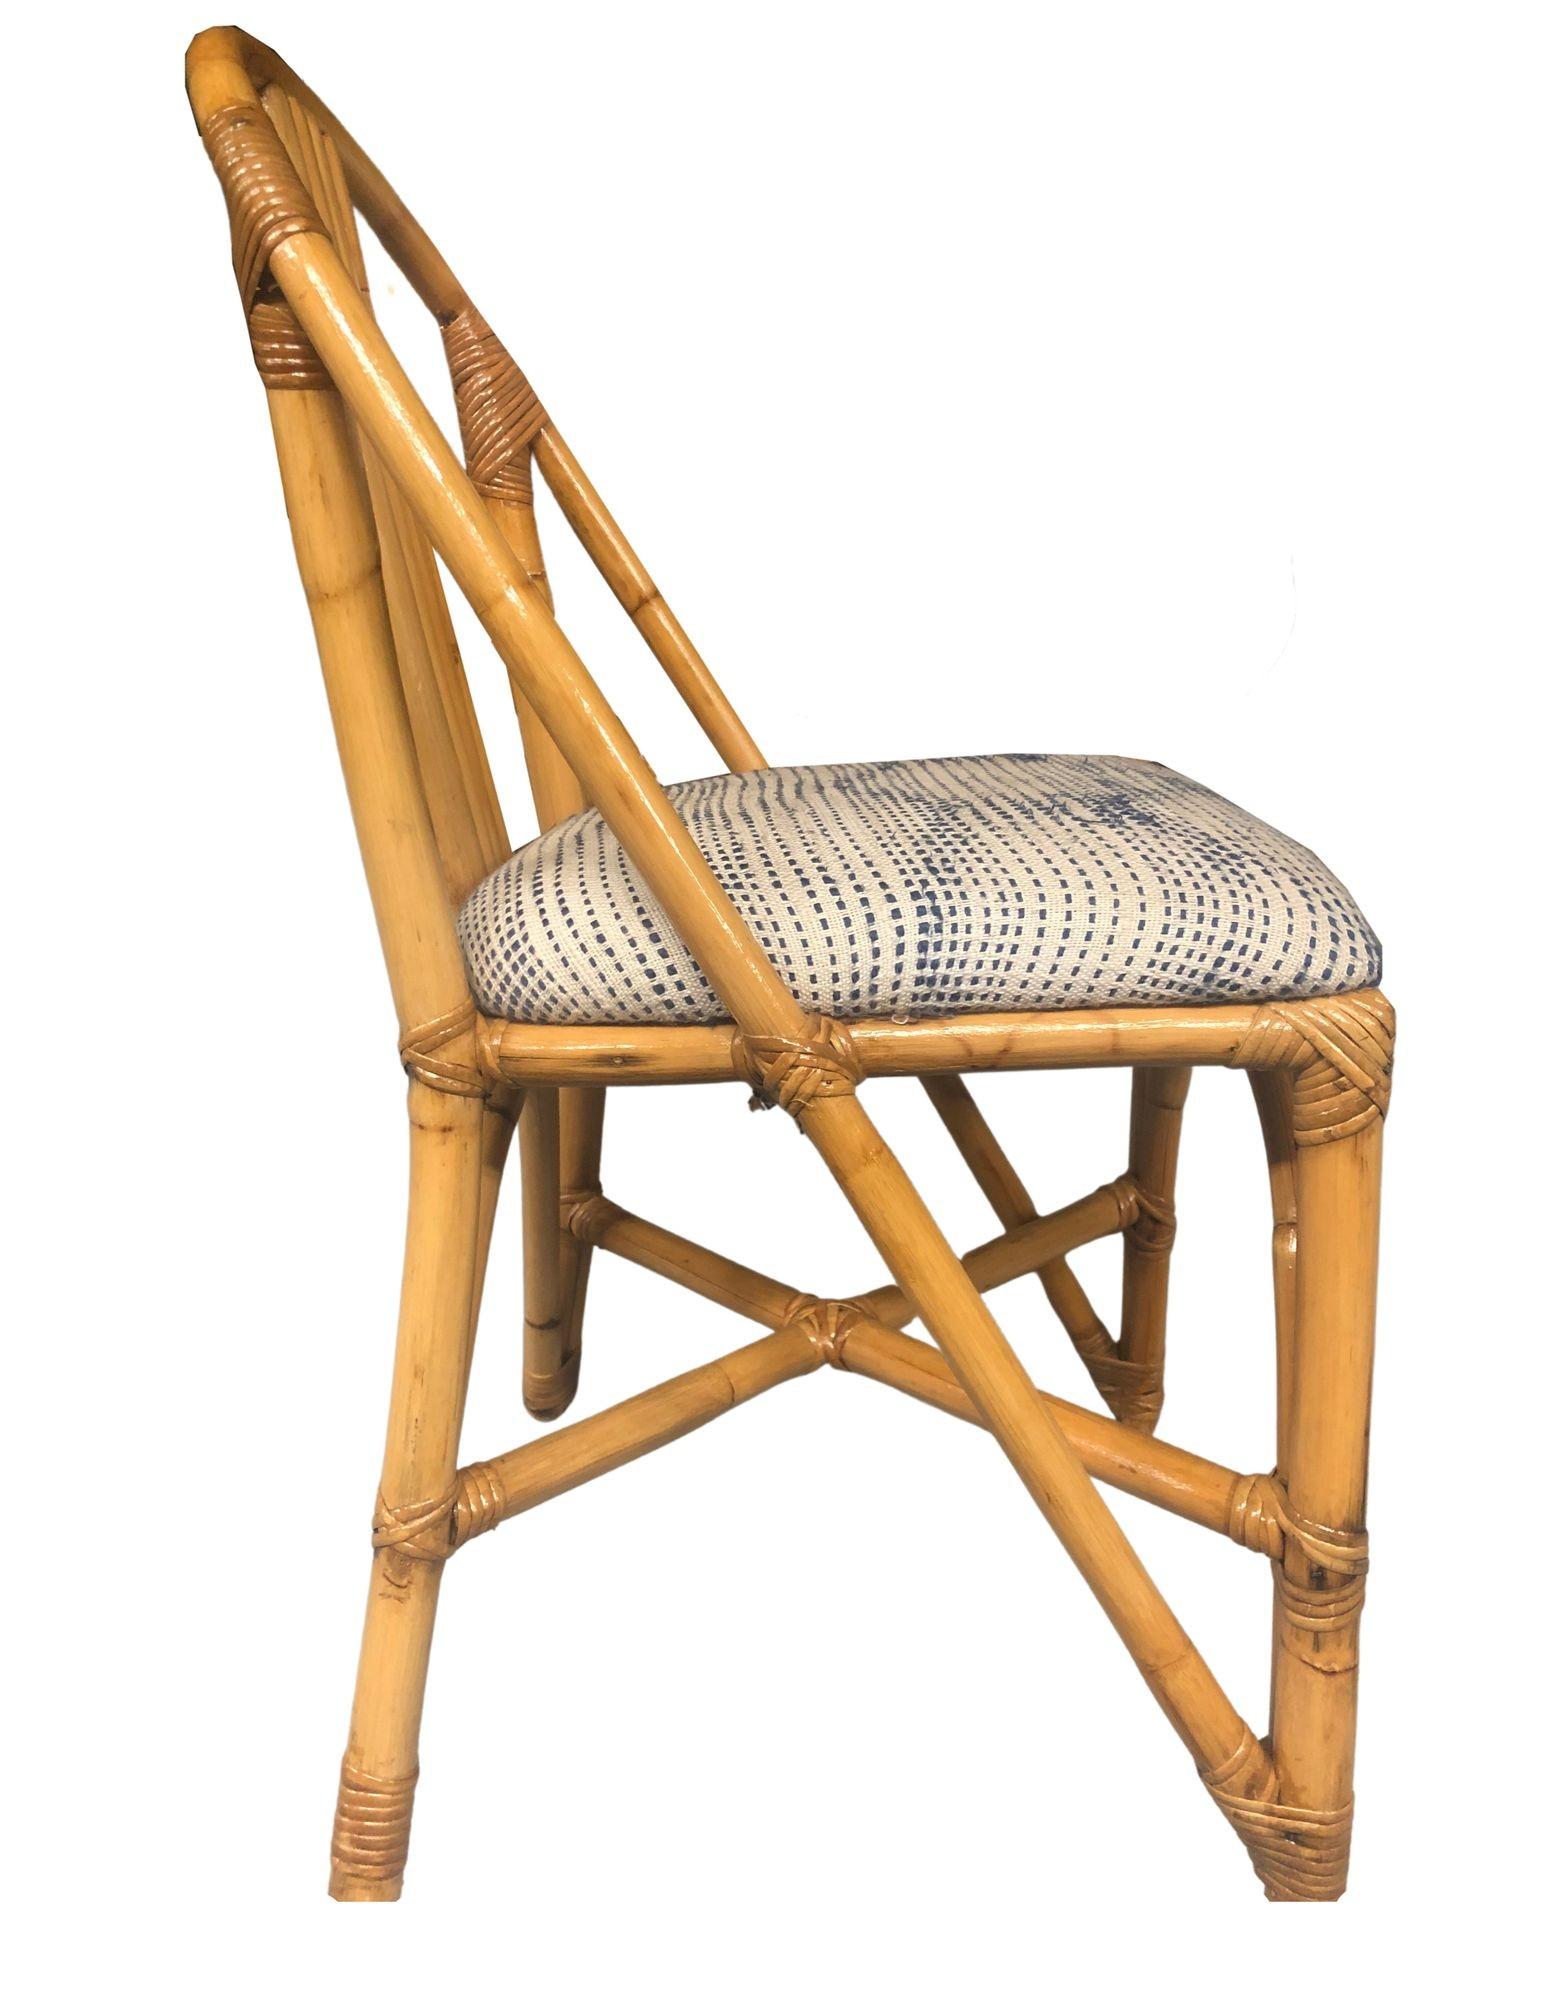 Restored Mid-century era rattan side accent chair featuring 5 strand seat back with a horseshoe arch that stretches from the front legs around the entirety of the chair to form a sculptural seat back. This side chair works great as an accent, at any